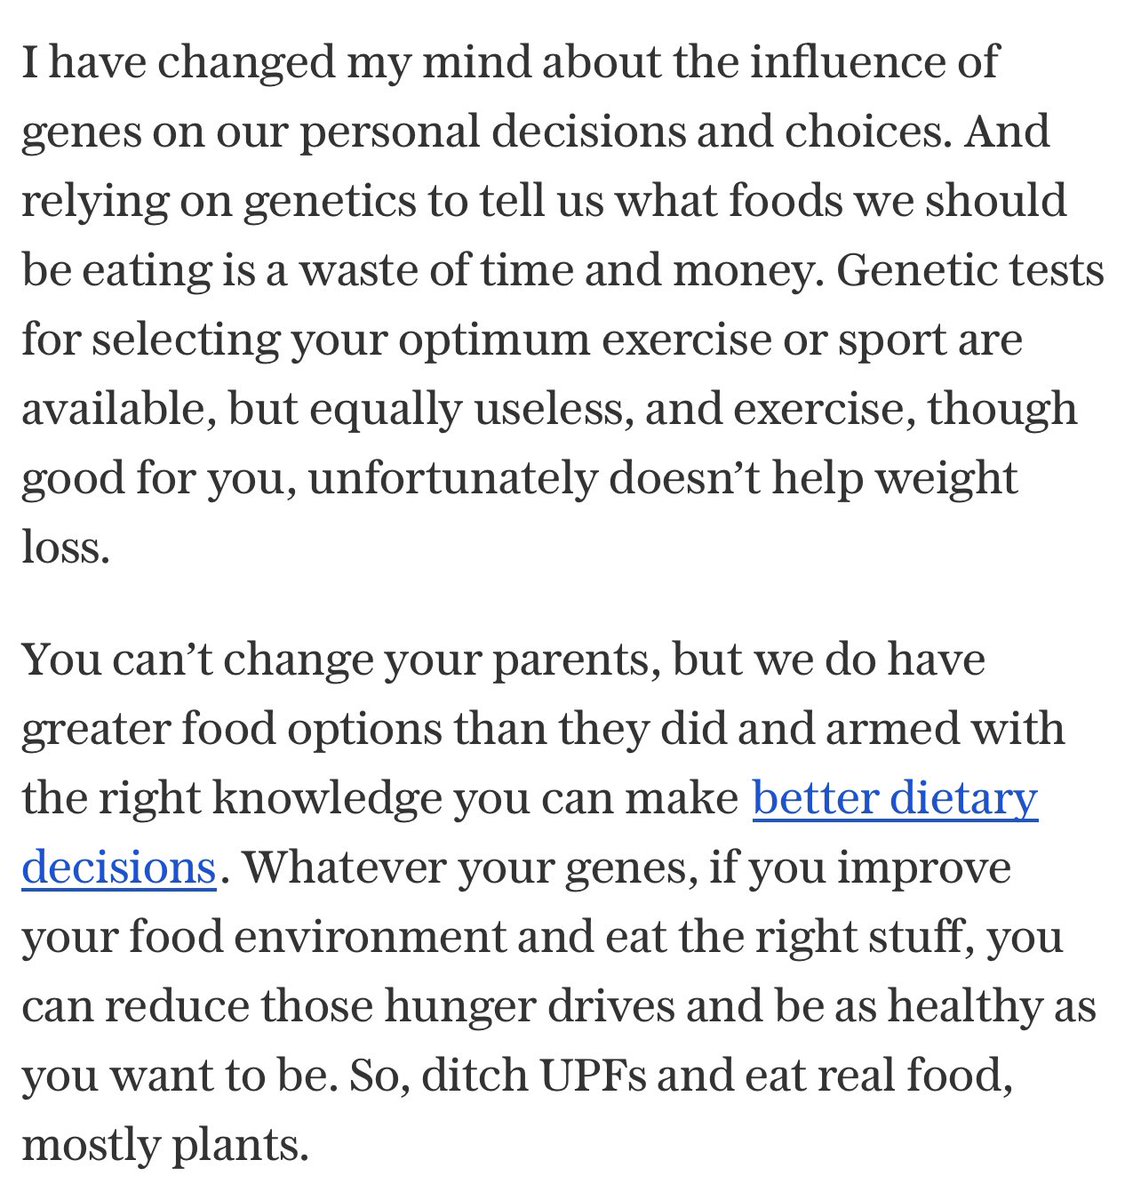 Powerful piece by @timspector on the critical role environment plays in your health. Obesity is not genetic. It depends mostly on how you live and the friends you keep. That’s why we have to improve our environment to improve our health. #HealthNation telegraph.co.uk/health-fitness…